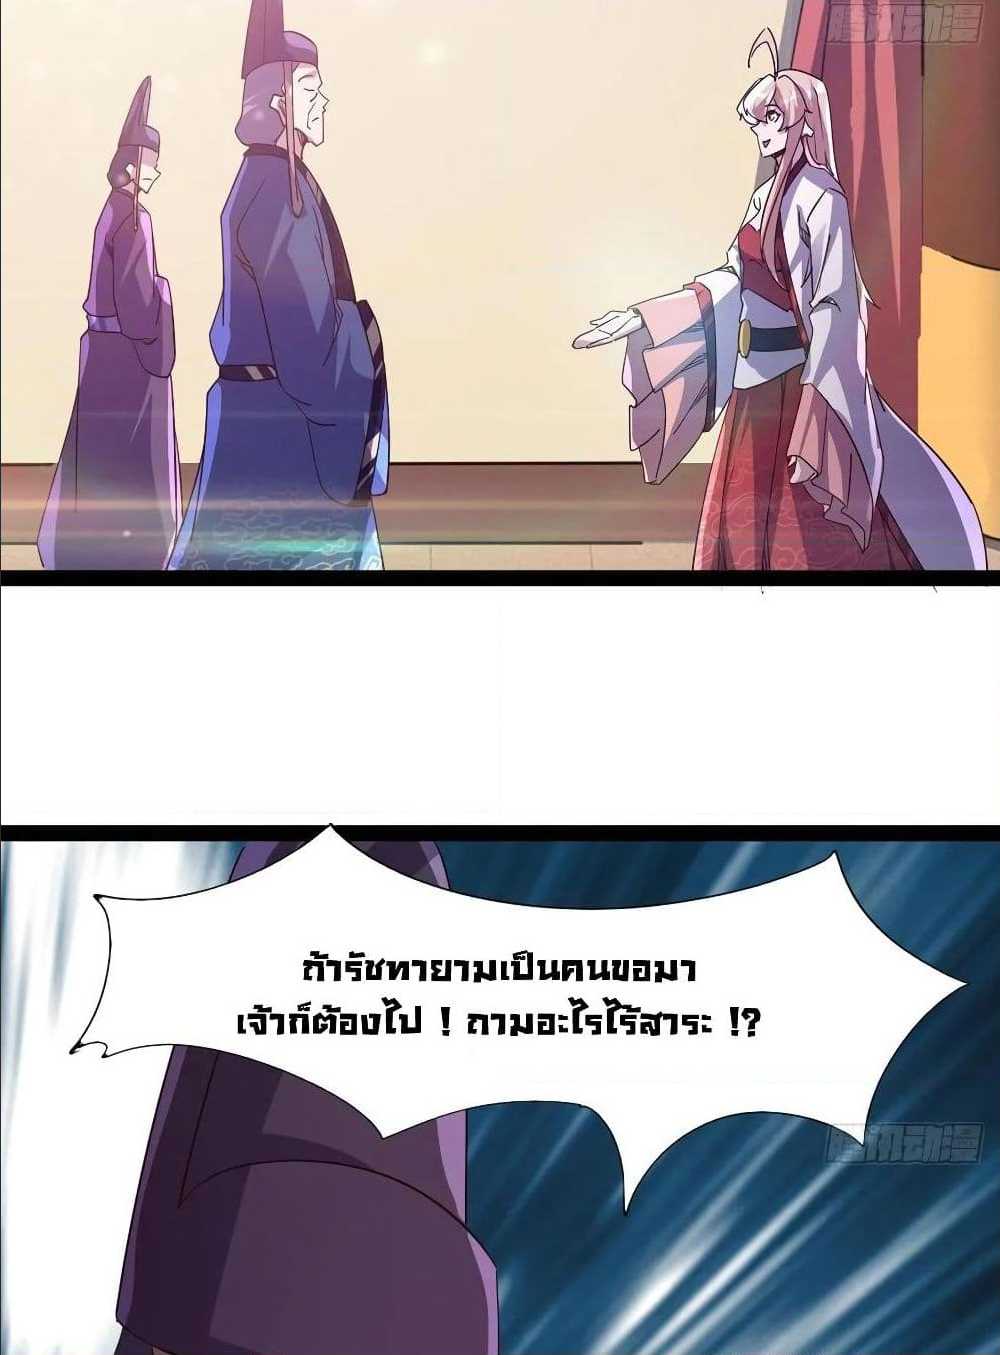 Path of the Sword 55 (27)